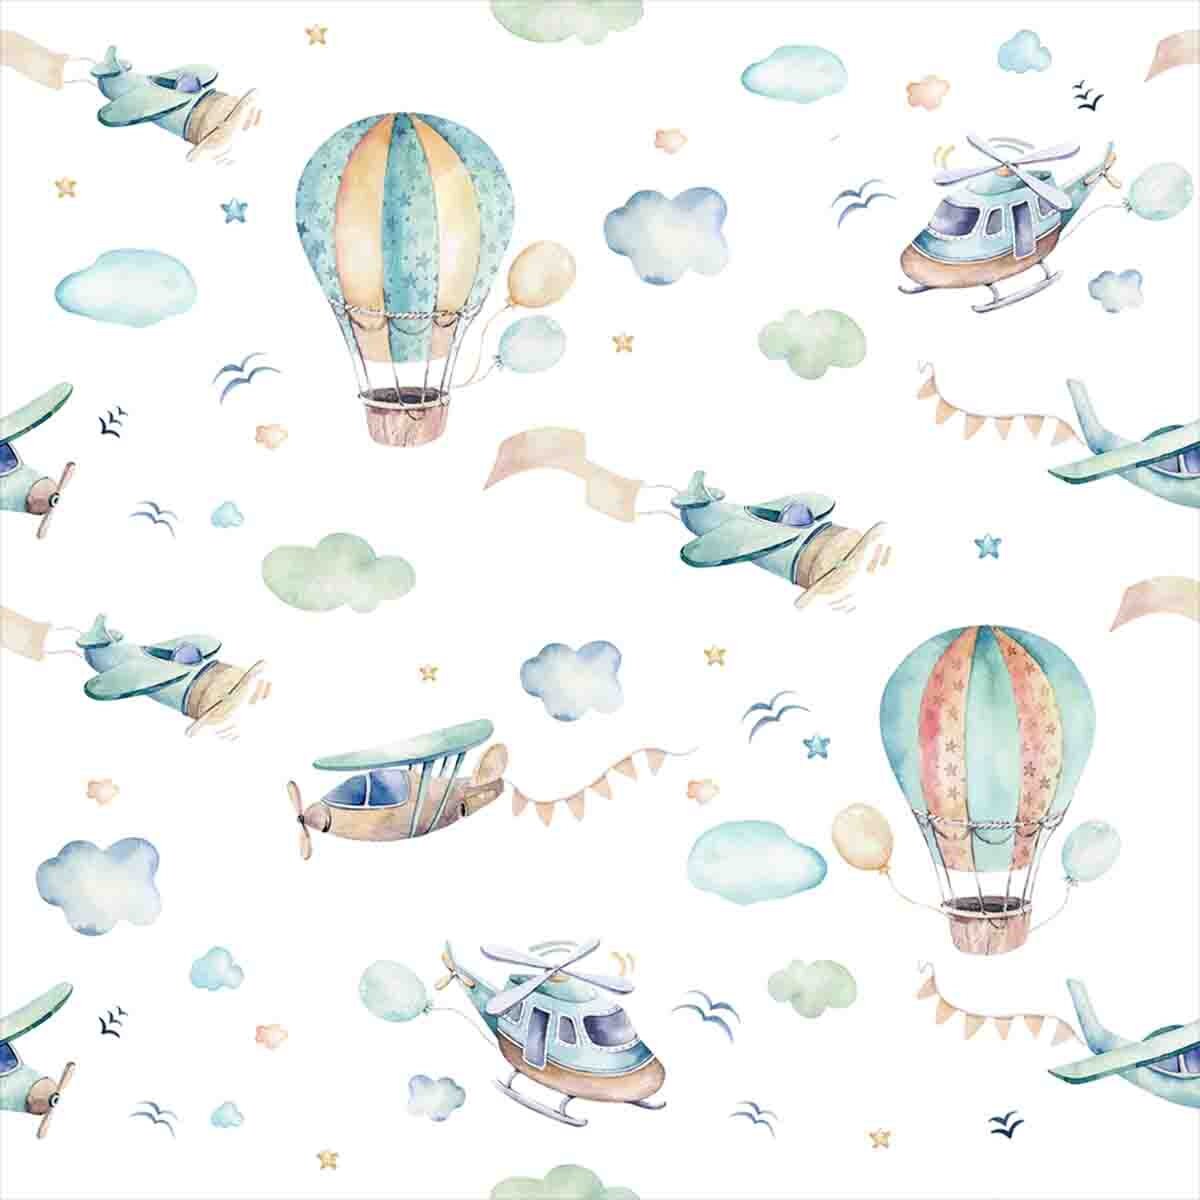 Baby Boy Airplanes, Hot Air Balloons and Helicopters Wallpaper Nursery Mural